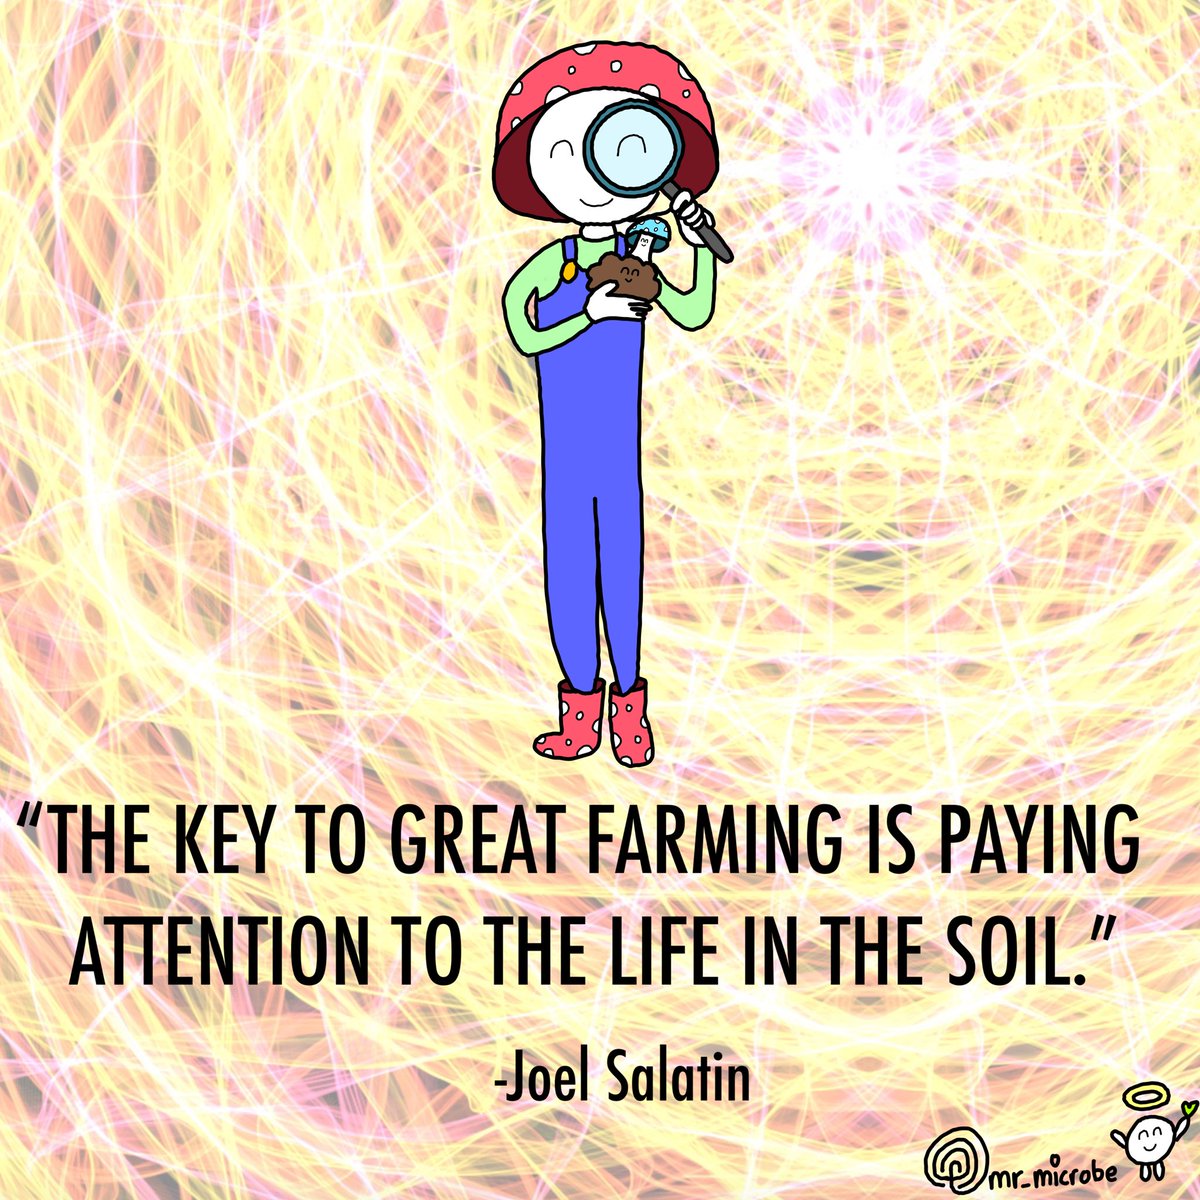 Daily art challenge day #358, paying attention to the smaller things in life 🍄🪱

#microbes #fungi #soil #quote #garden #farming #permaculture #microbiology #knf #jadam #soilmicrobes #nft #nfts #nftart #nftart #nftartist #nftproject #nftcommunity #nftdrop #rarible #cryptoart